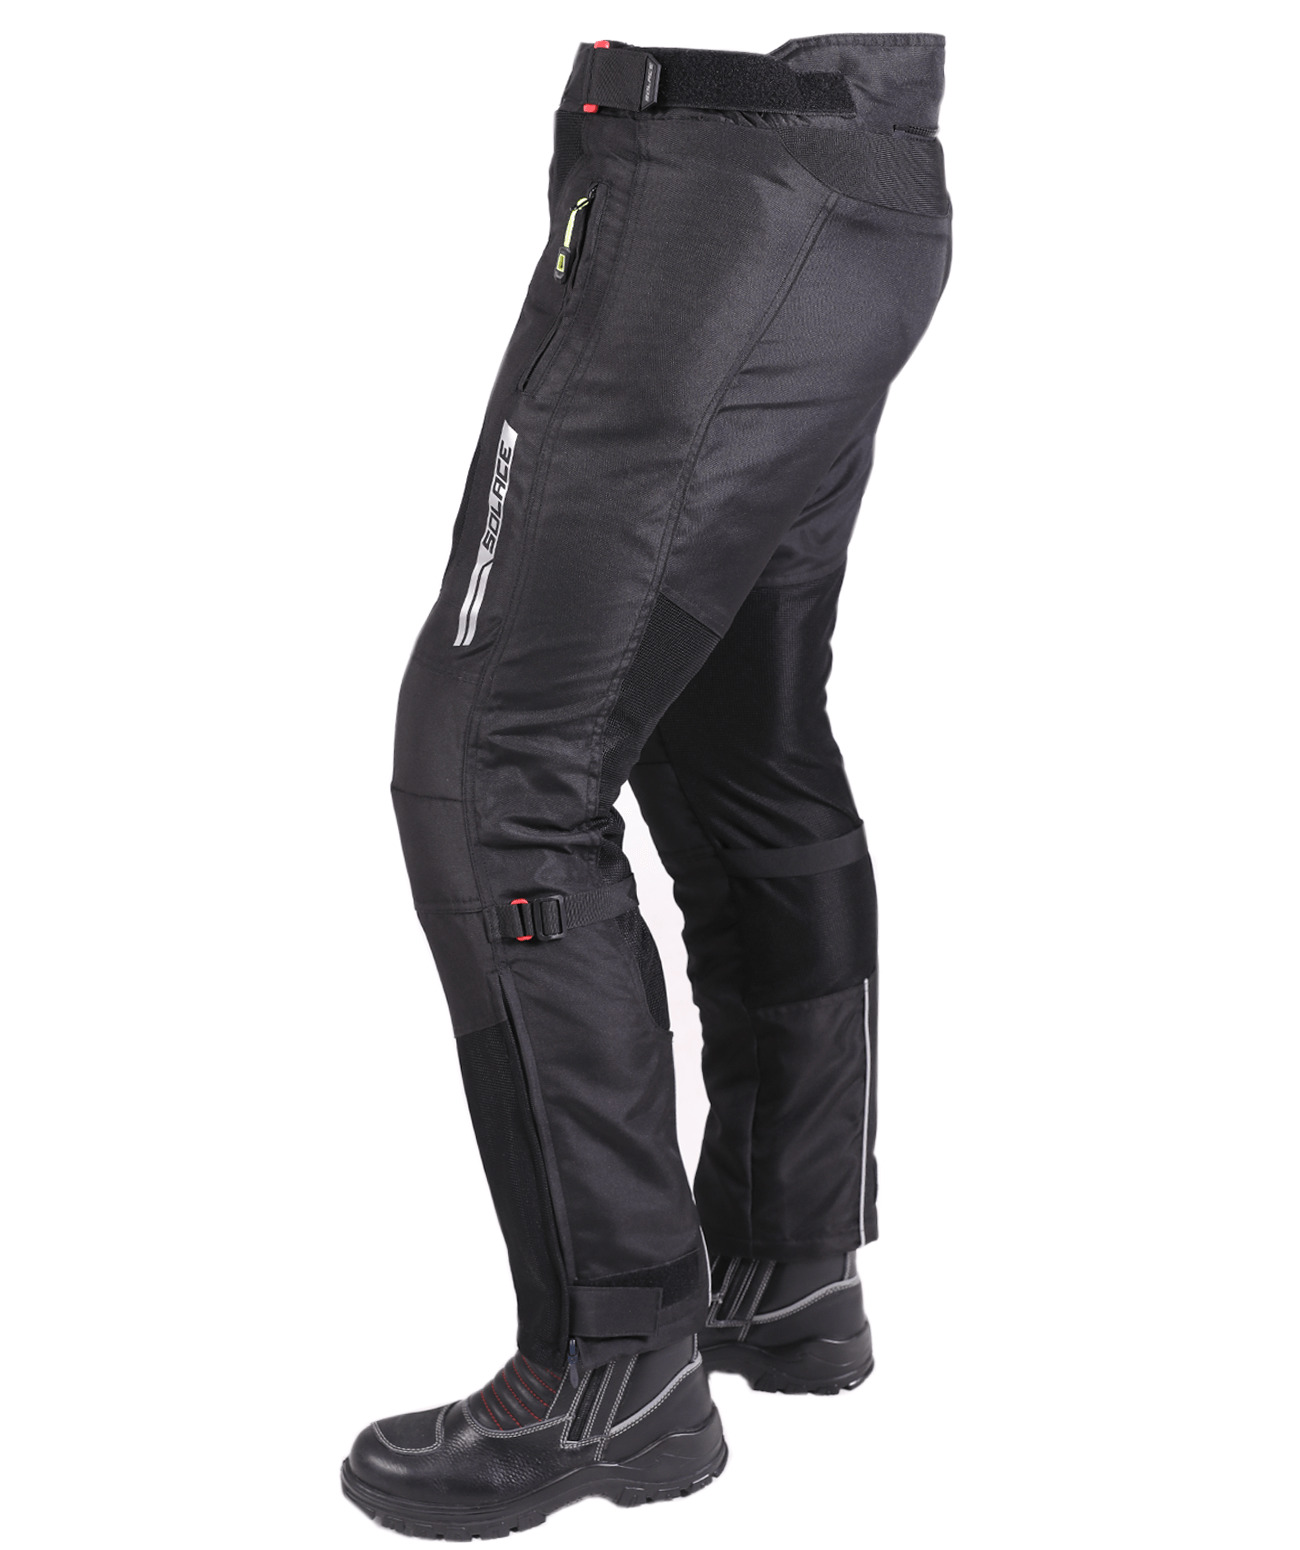 Solace S30 Pant V3 (Black) - Ridersden Riding Gear & Accessories